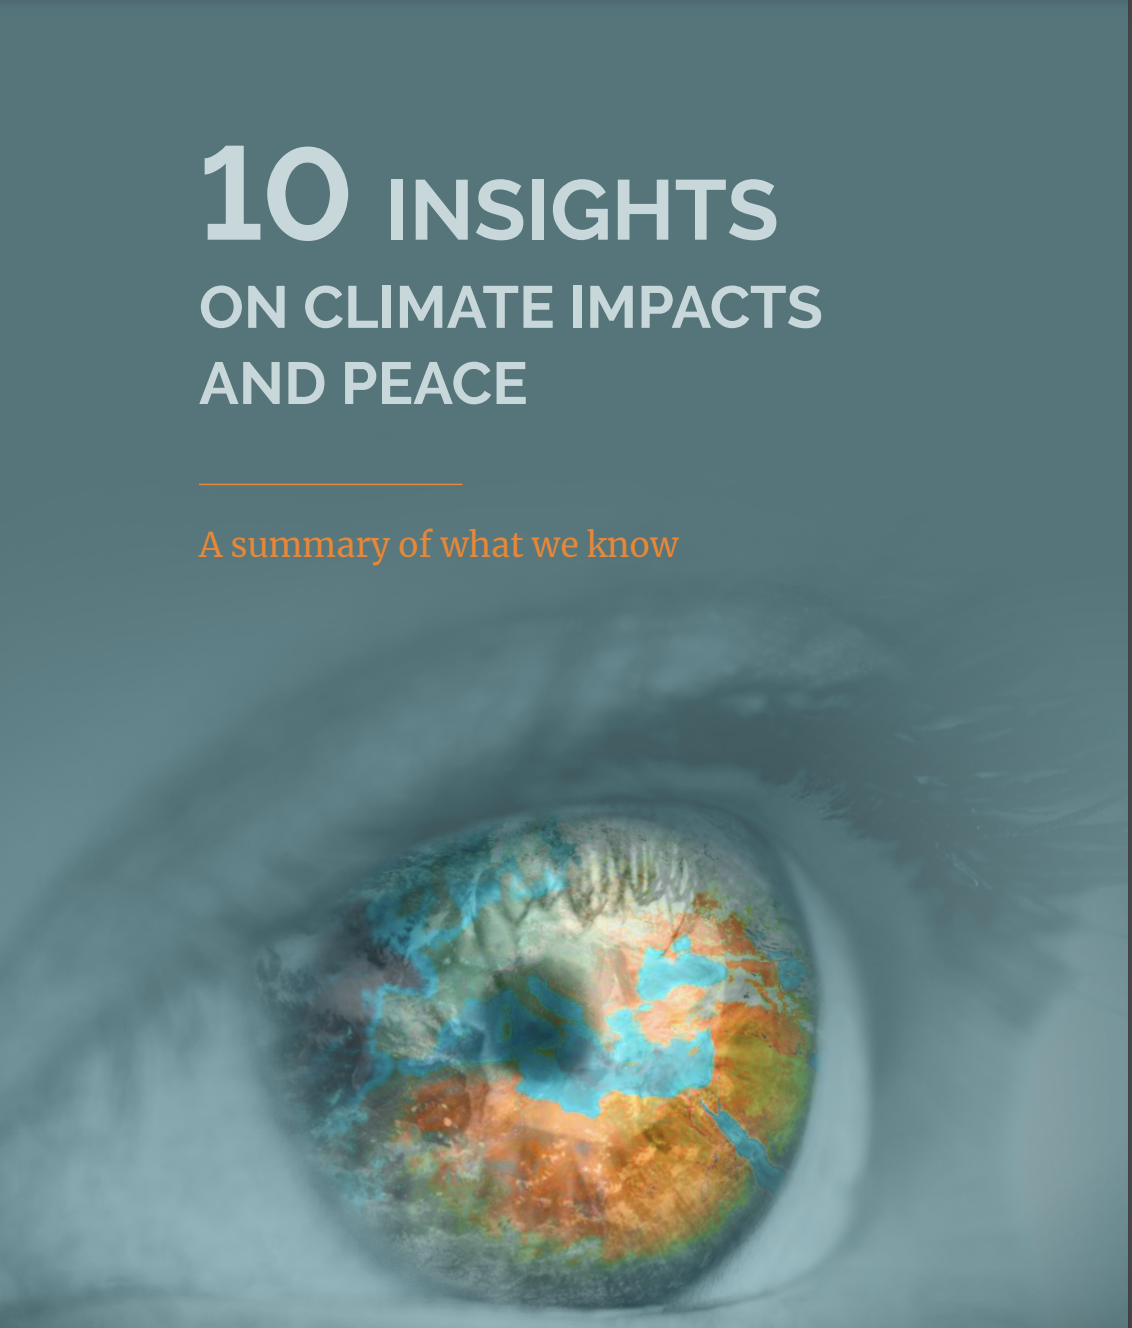 WP5 International cooperation, development and resilience- 10 INSIGHTS ON CLIMATE IMPACTS AND PEACE